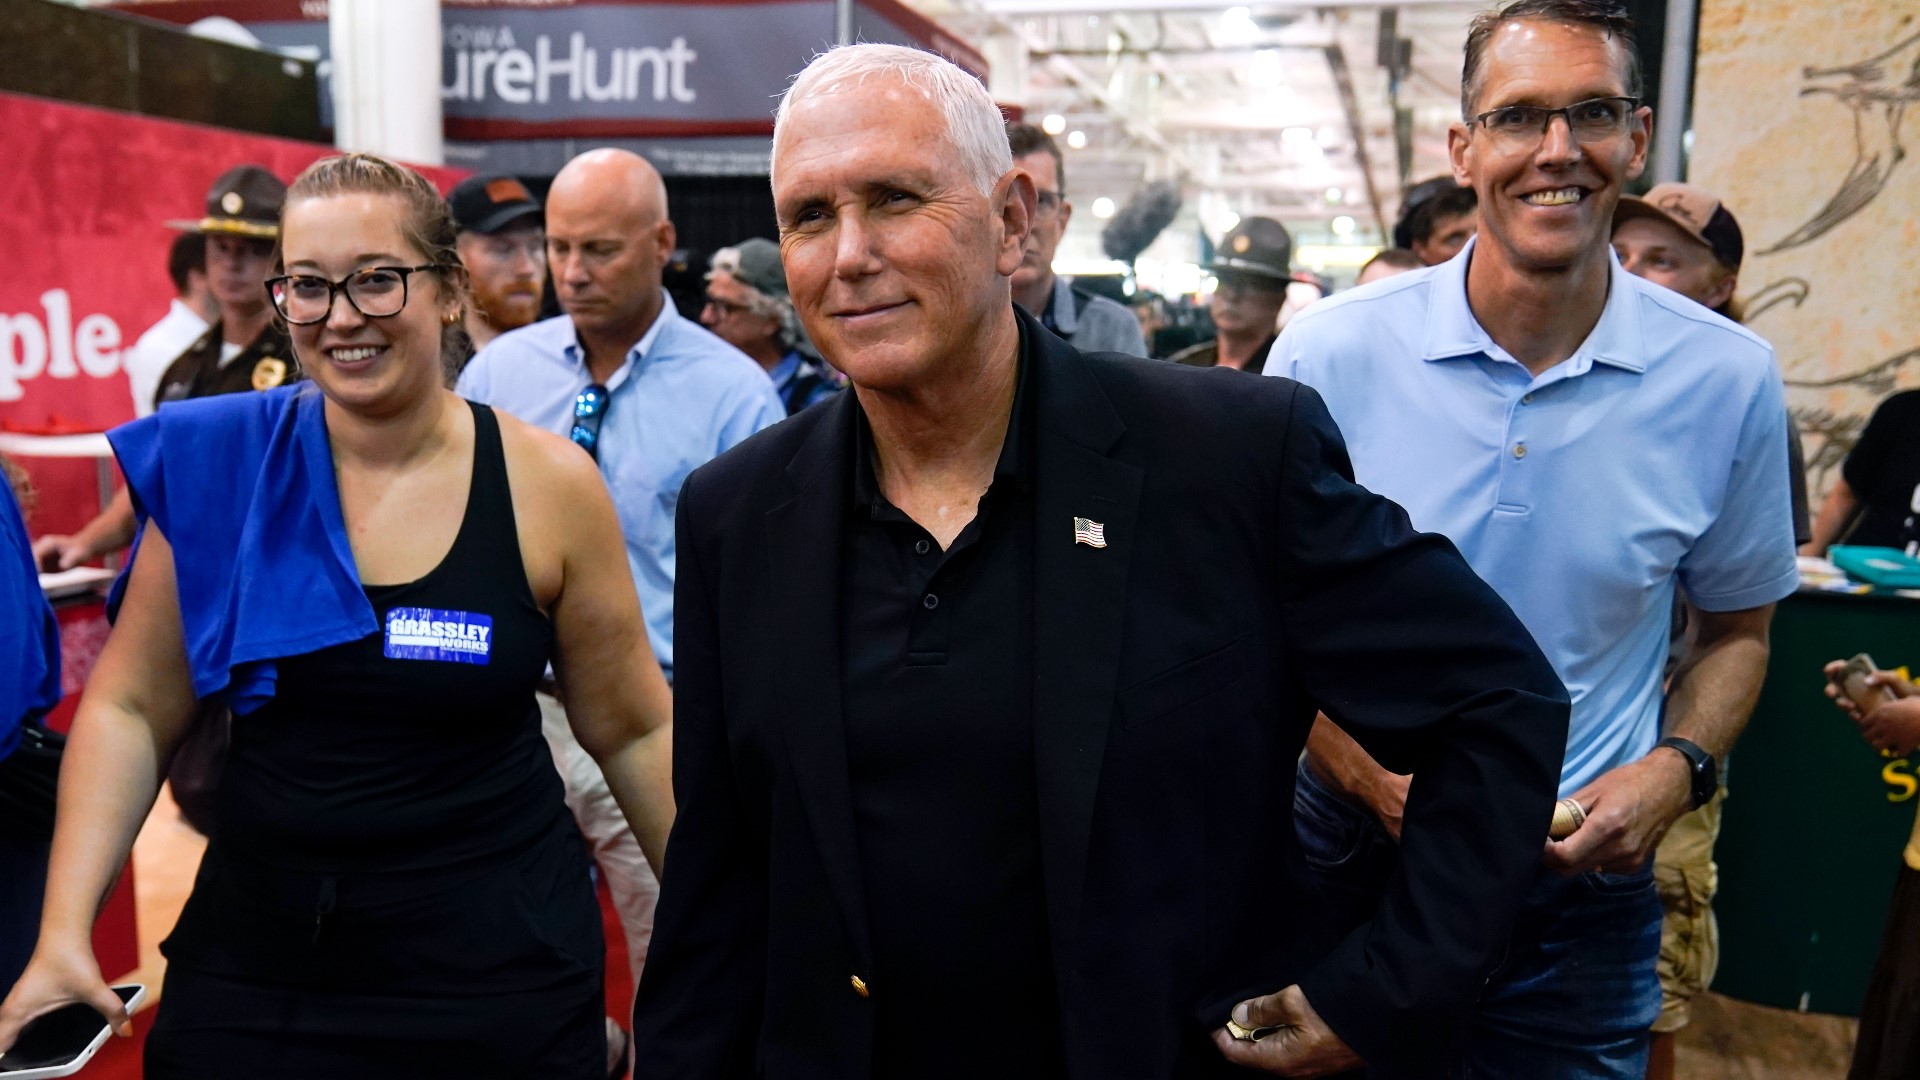 Former vice president Mike Pence was in Cedar Rapids, Iowa, this afternoon, leading some to believe the visit comes ahead of a potential 2024 presidential run.